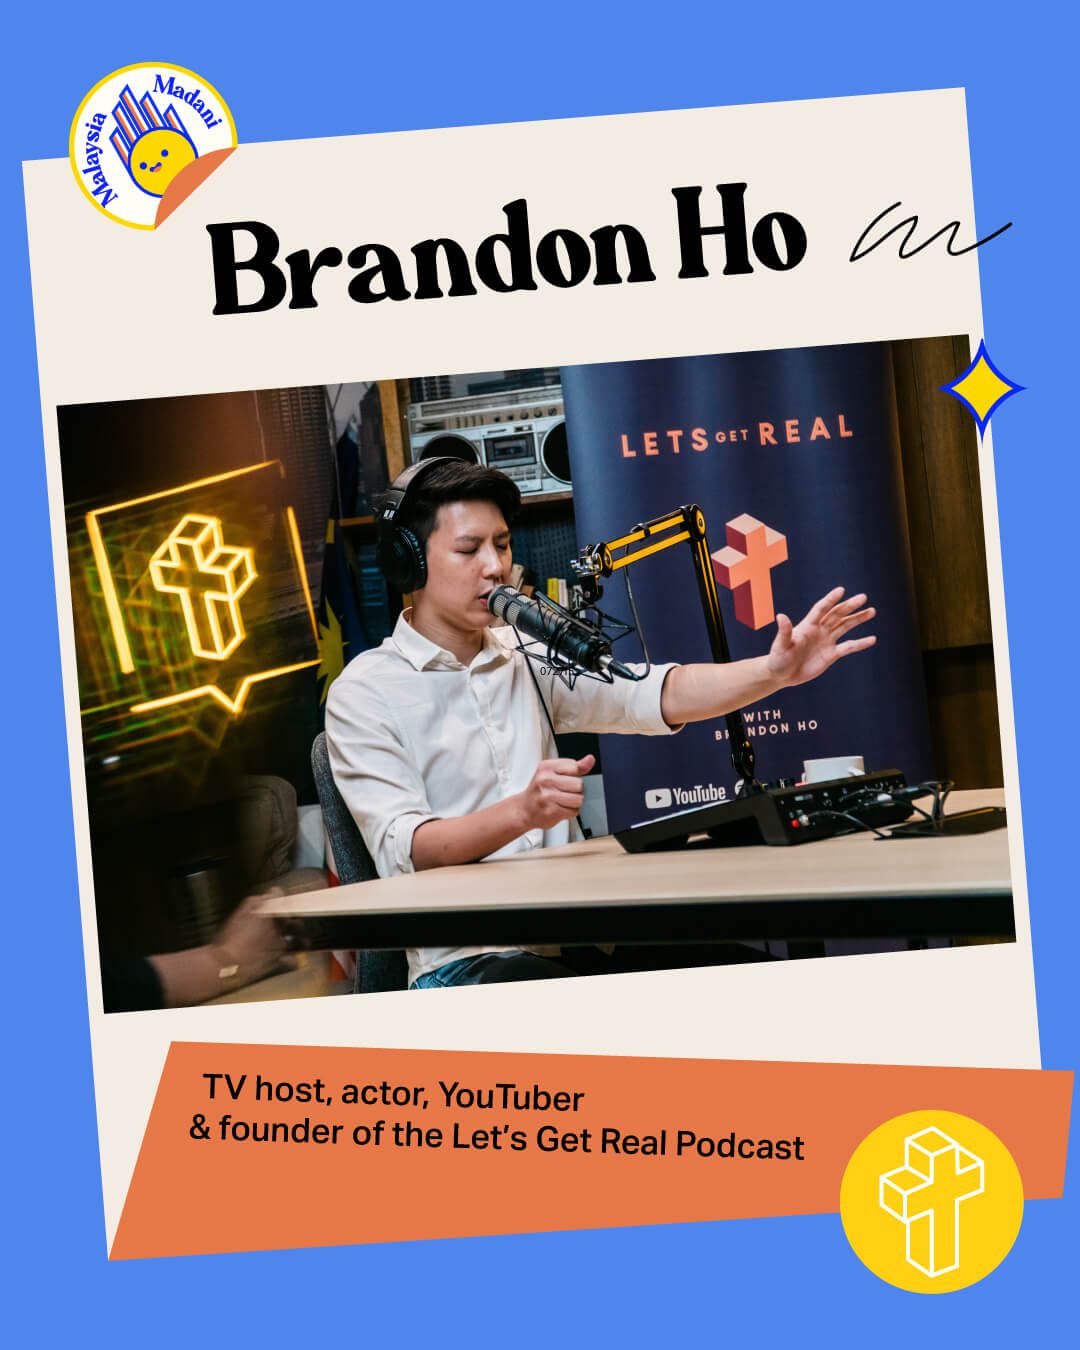 Brandon Ho, TV host, actor, YouTuber, and founder of the Let’s Get Real Podcast 